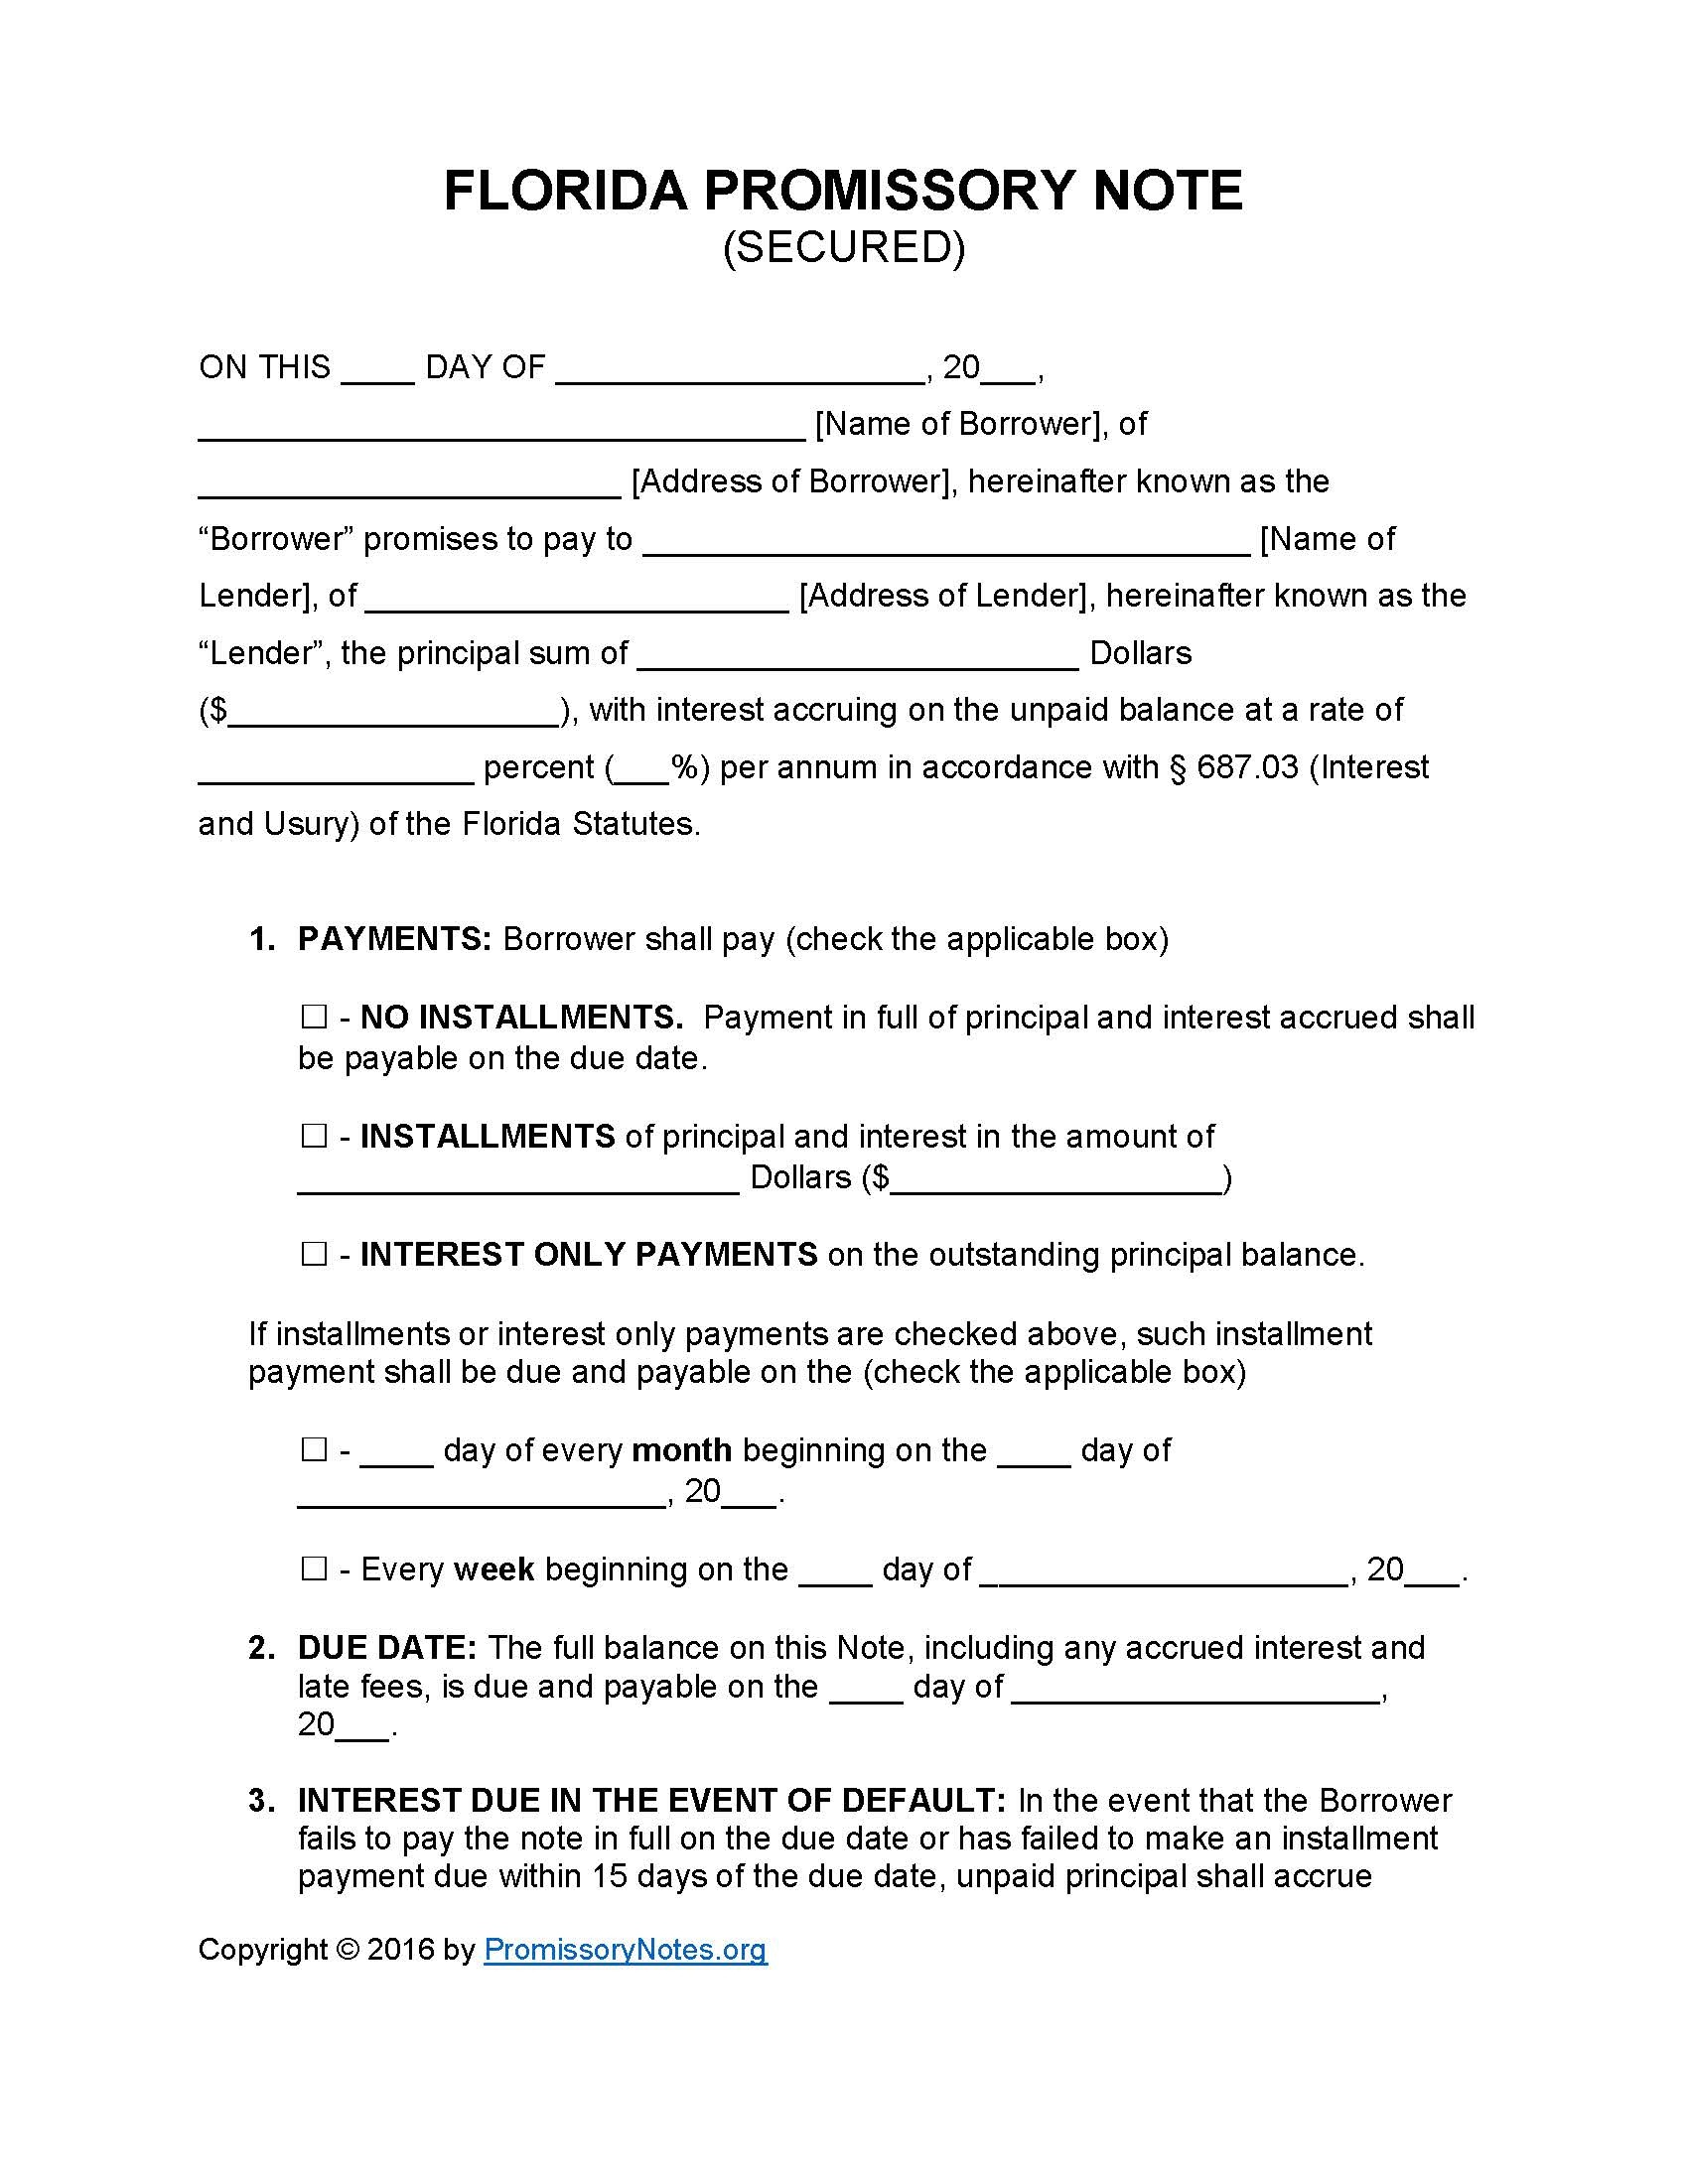 Florida Secured Promissory Note Template - Promissory Notes - Free Promissory Note Printable Form